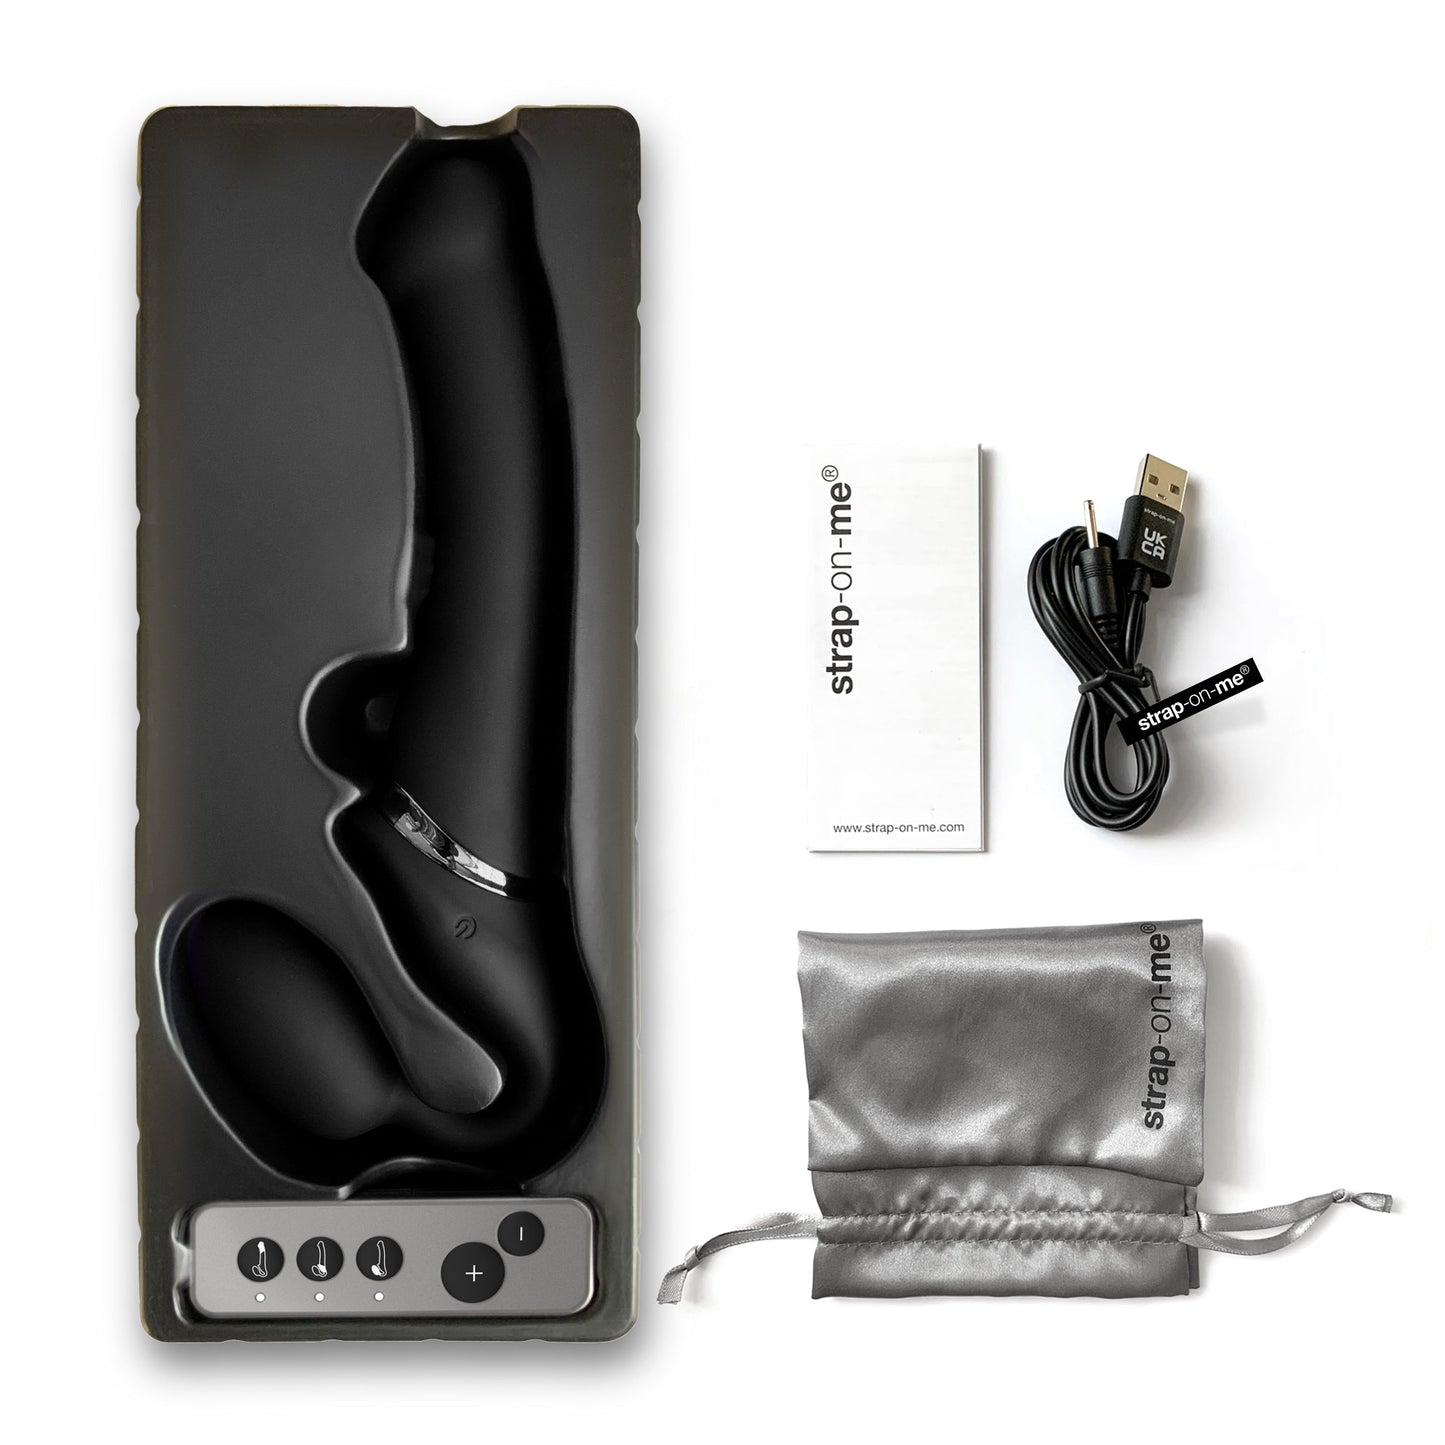 Strap On Me Vibrating Strap-on Remote Controlled 3 Motors - Black - Thorn & Feather